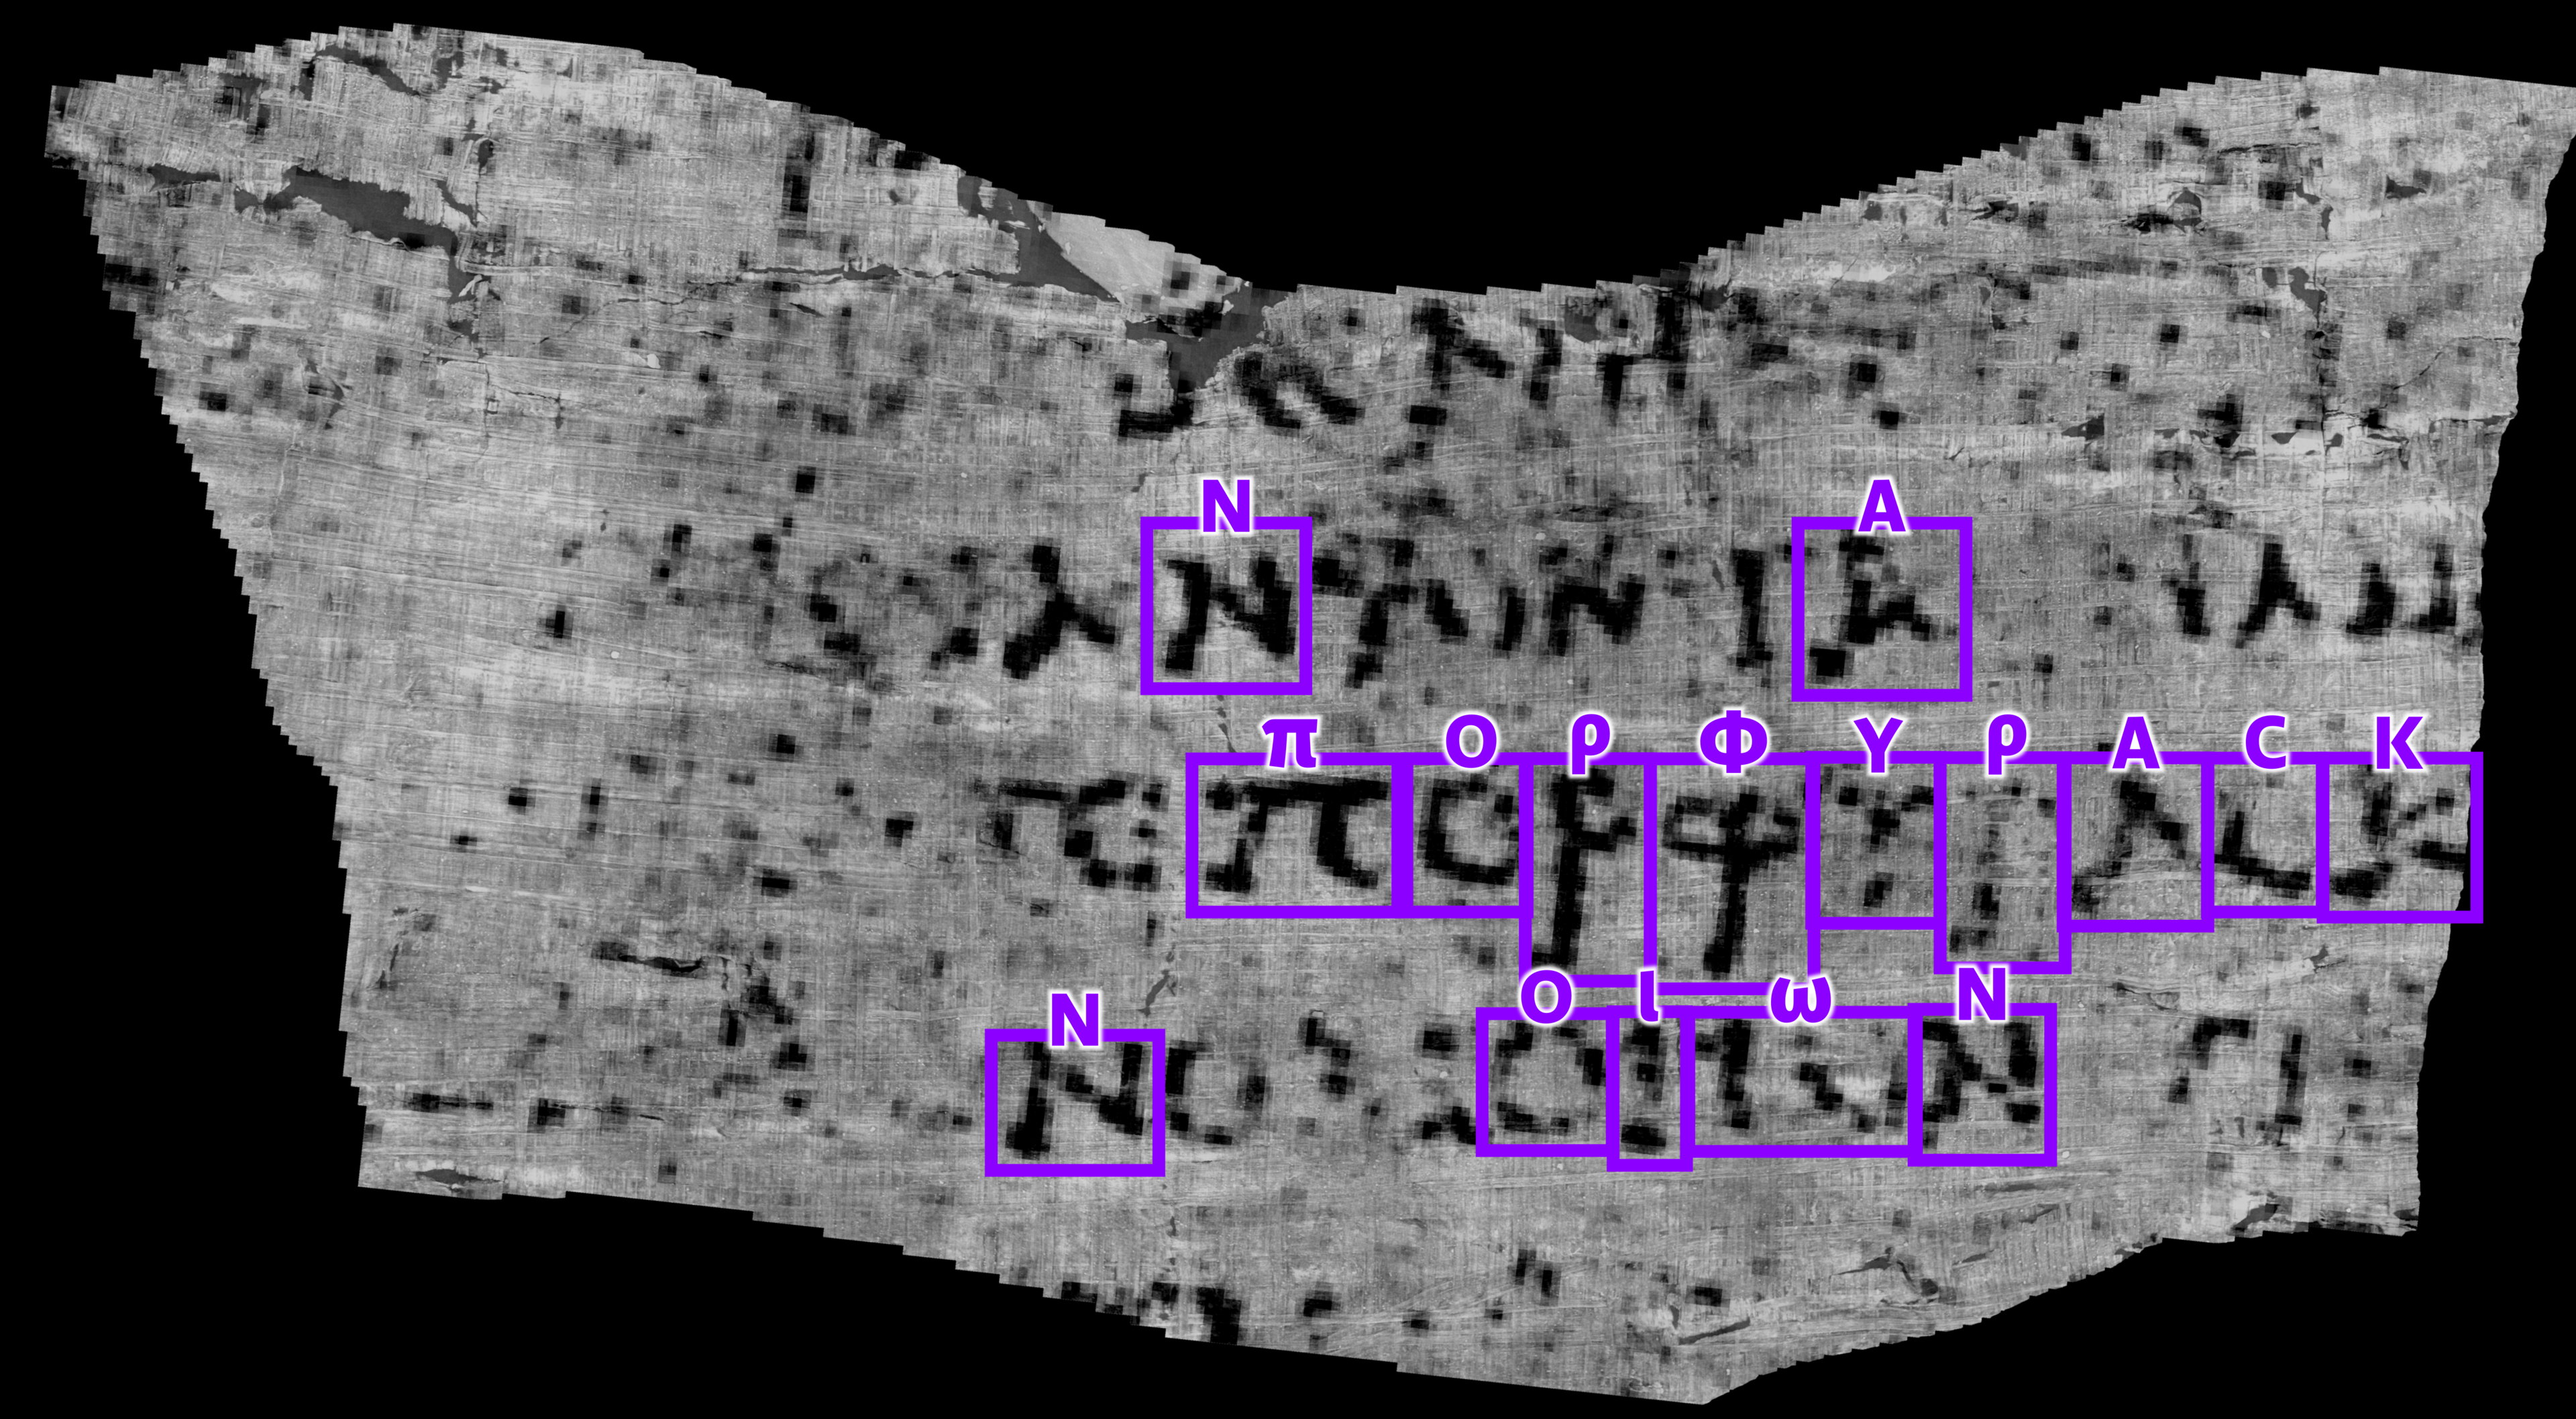 A composite computer image showing some glyphs in black on a grey piece of reconstructed Herculaneum parchment. The word “ΠΟΡΦΥΡΑϹ” is highlighted - the Ancient Greek word for purple. 